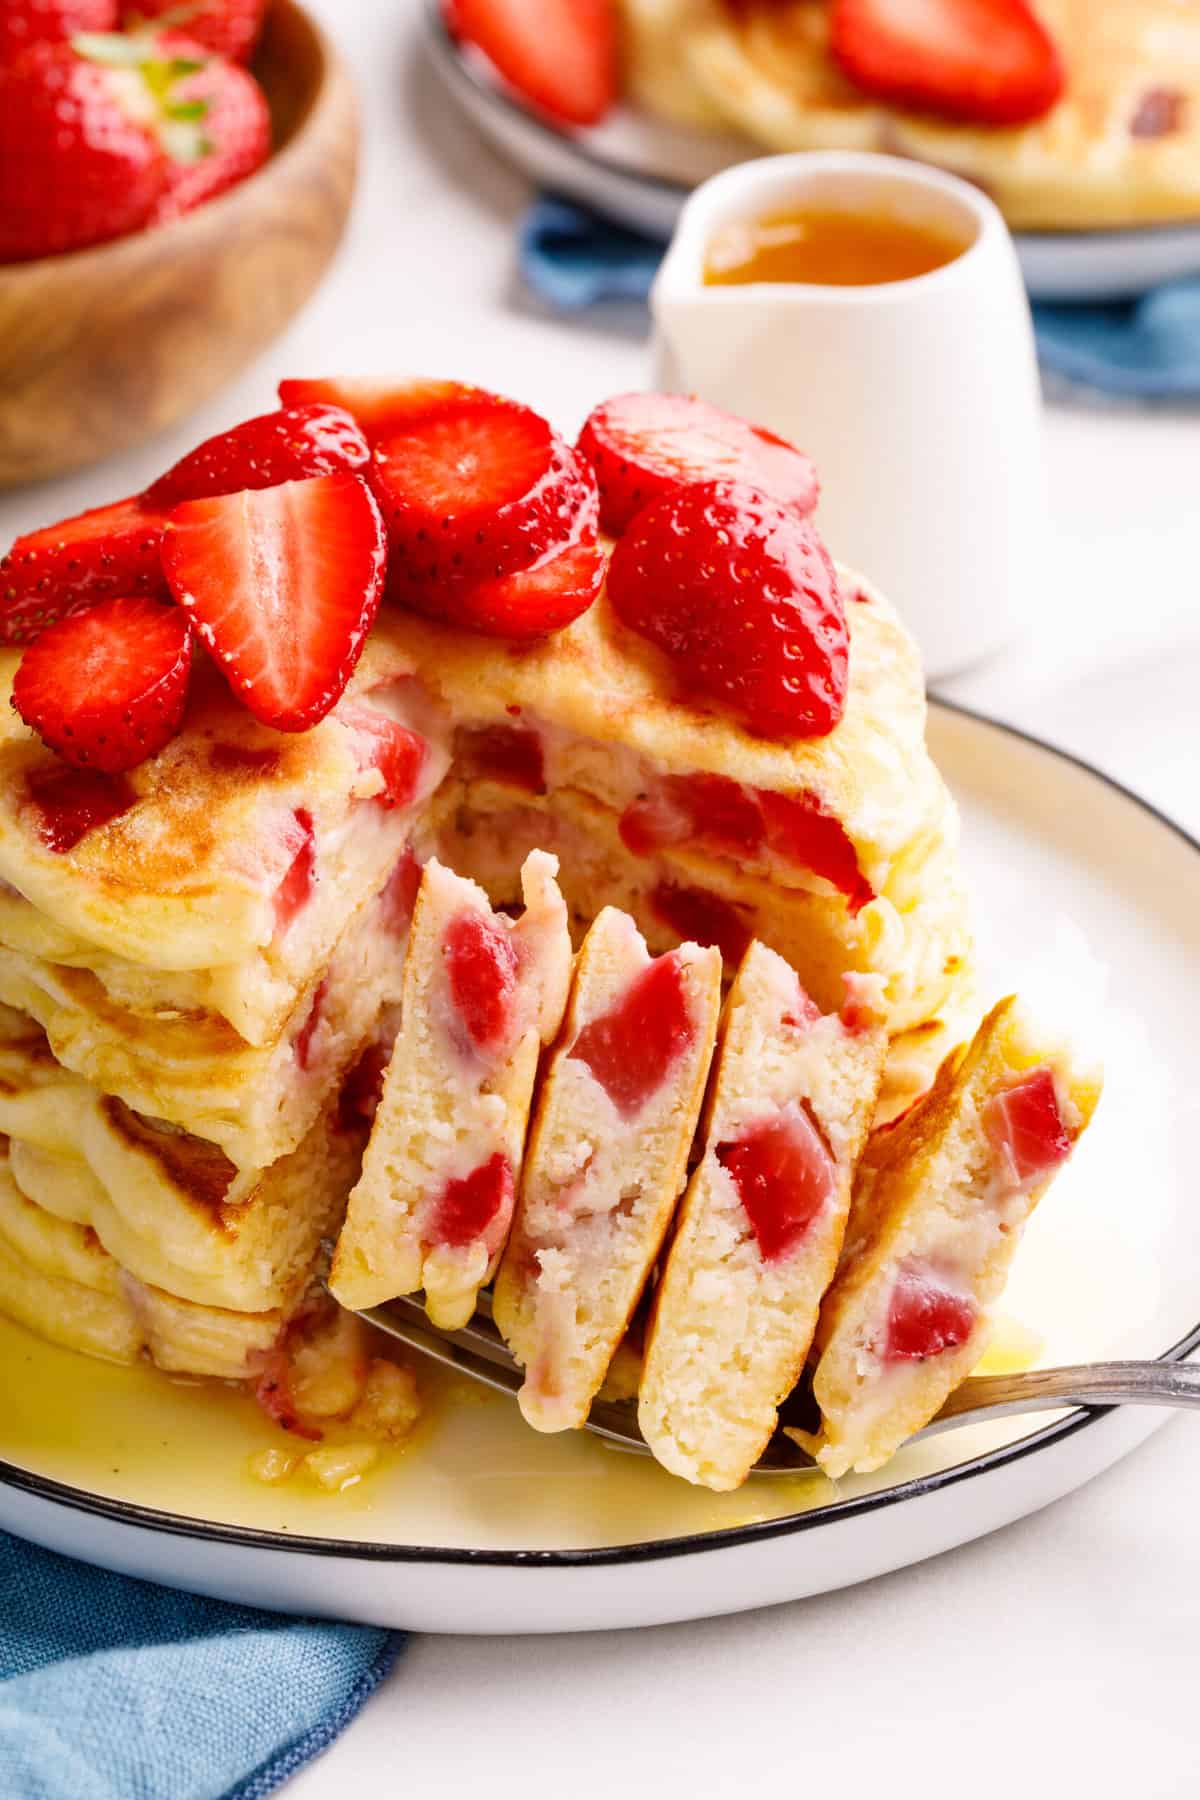 close up image of a stack of four strawberry pancakes cut into to show the cross section